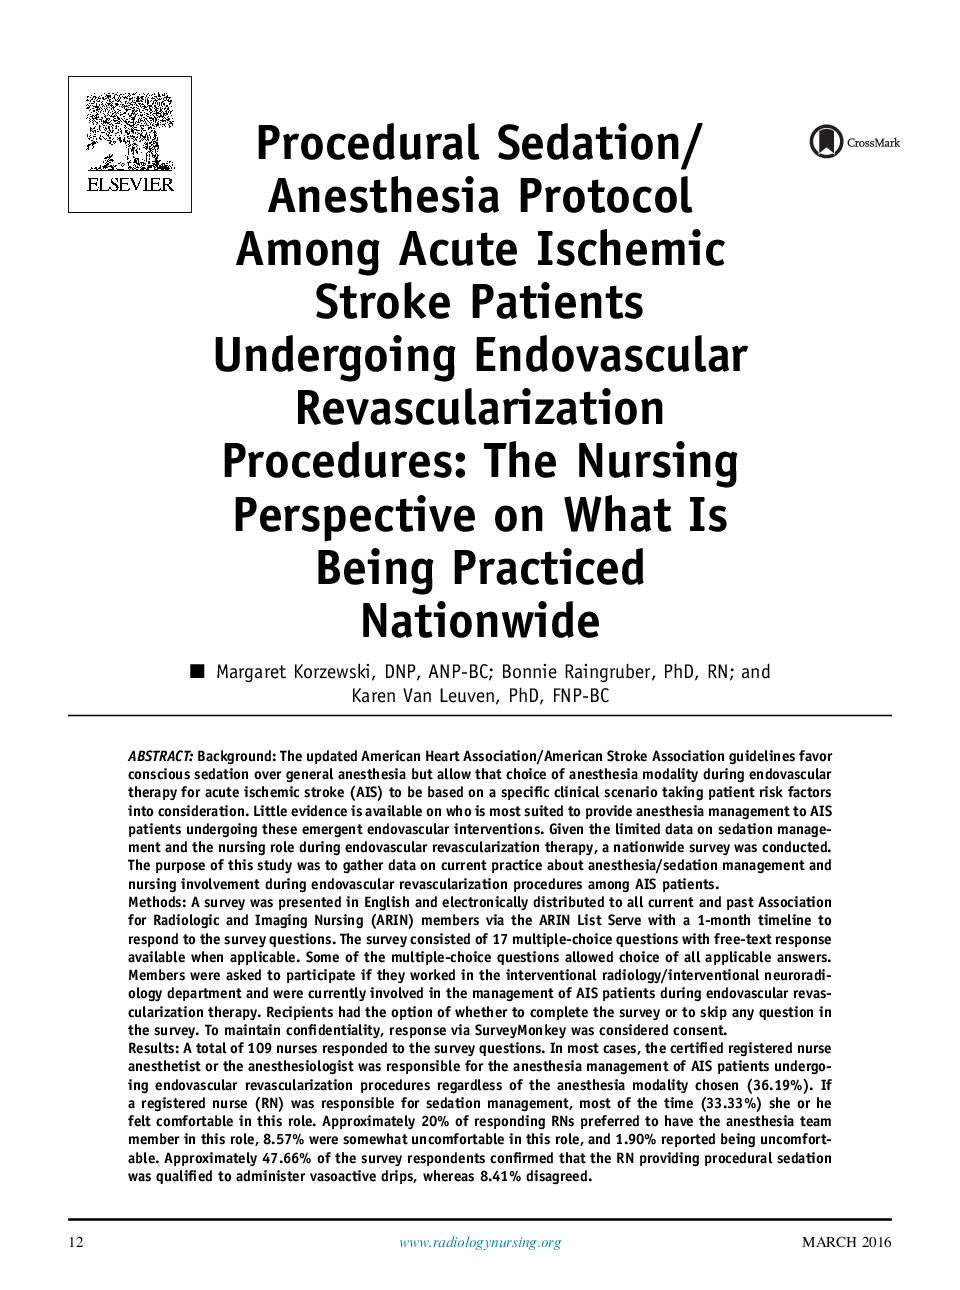 Procedural Sedation/Anesthesia Protocol Among Acute Ischemic Stroke Patients Undergoing Endovascular Revascularization Procedures: The Nursing Perspective on What Is Being Practiced Nationwide 